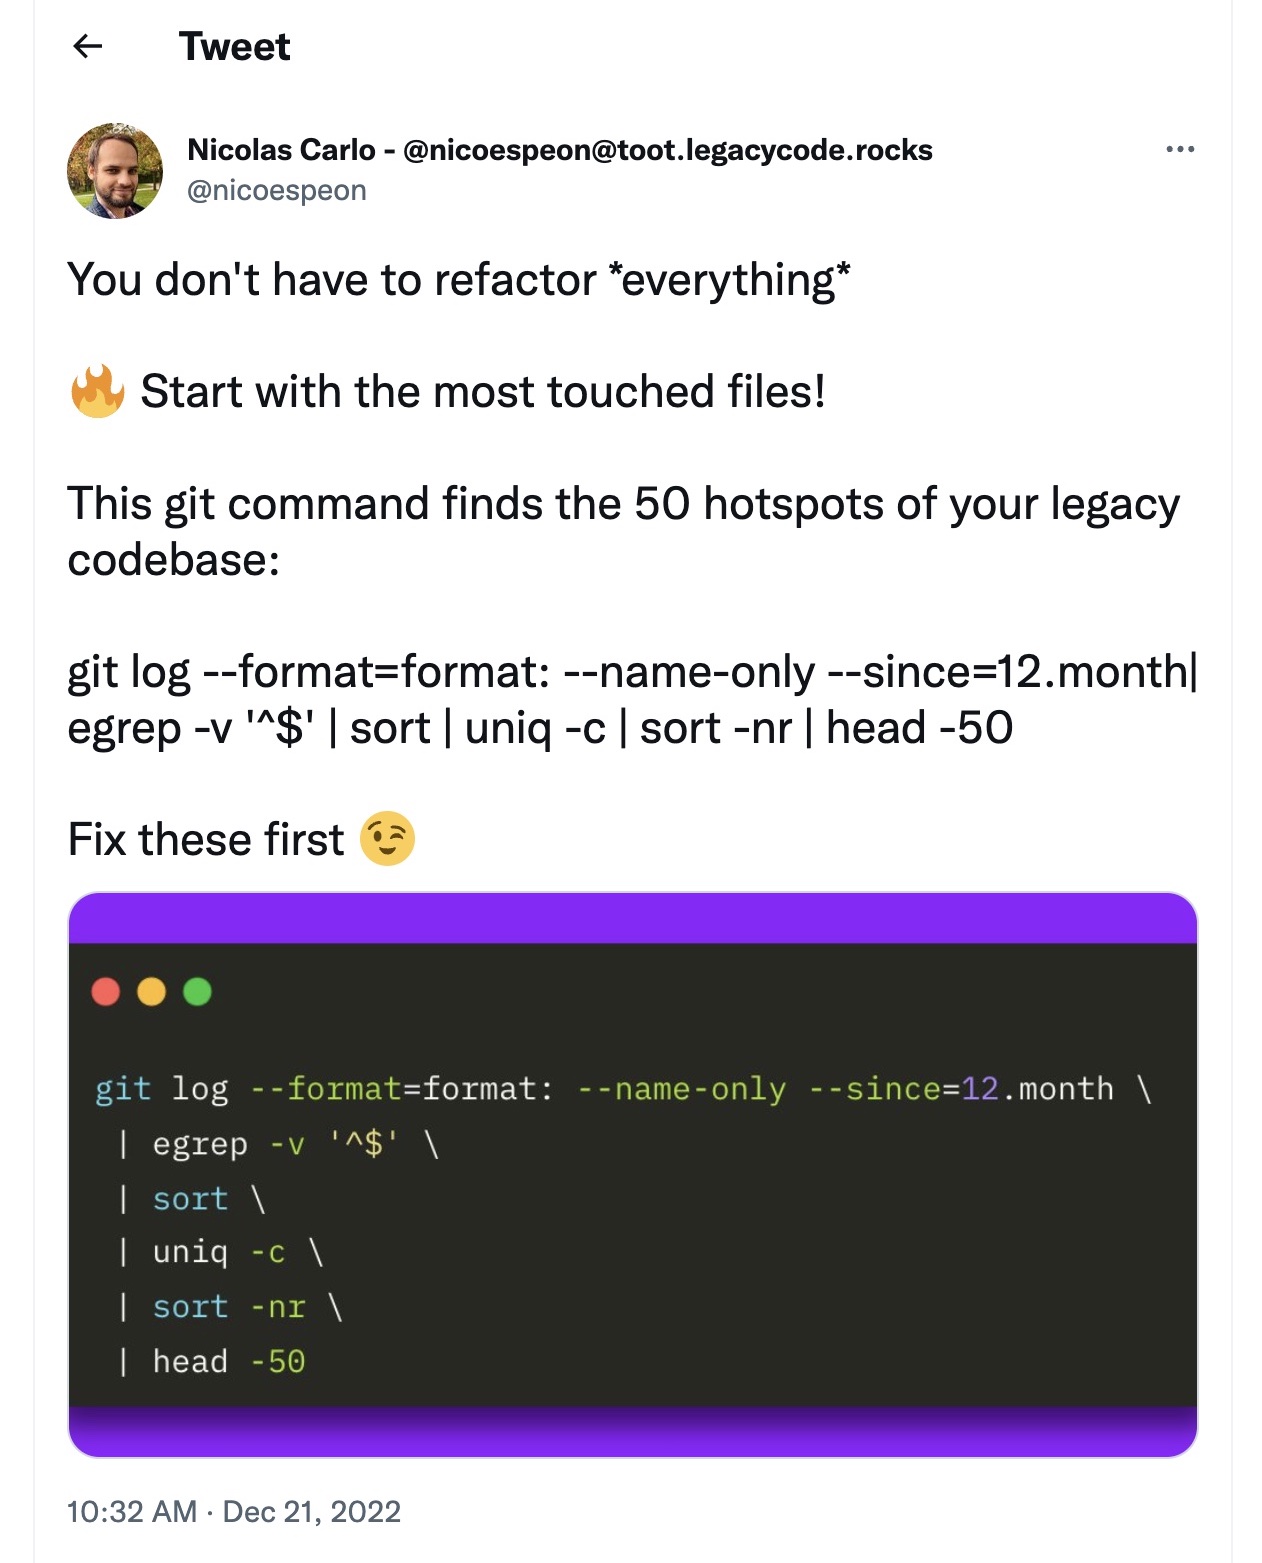 Nicolas Carlo tweet about finding hotspots in a git repo